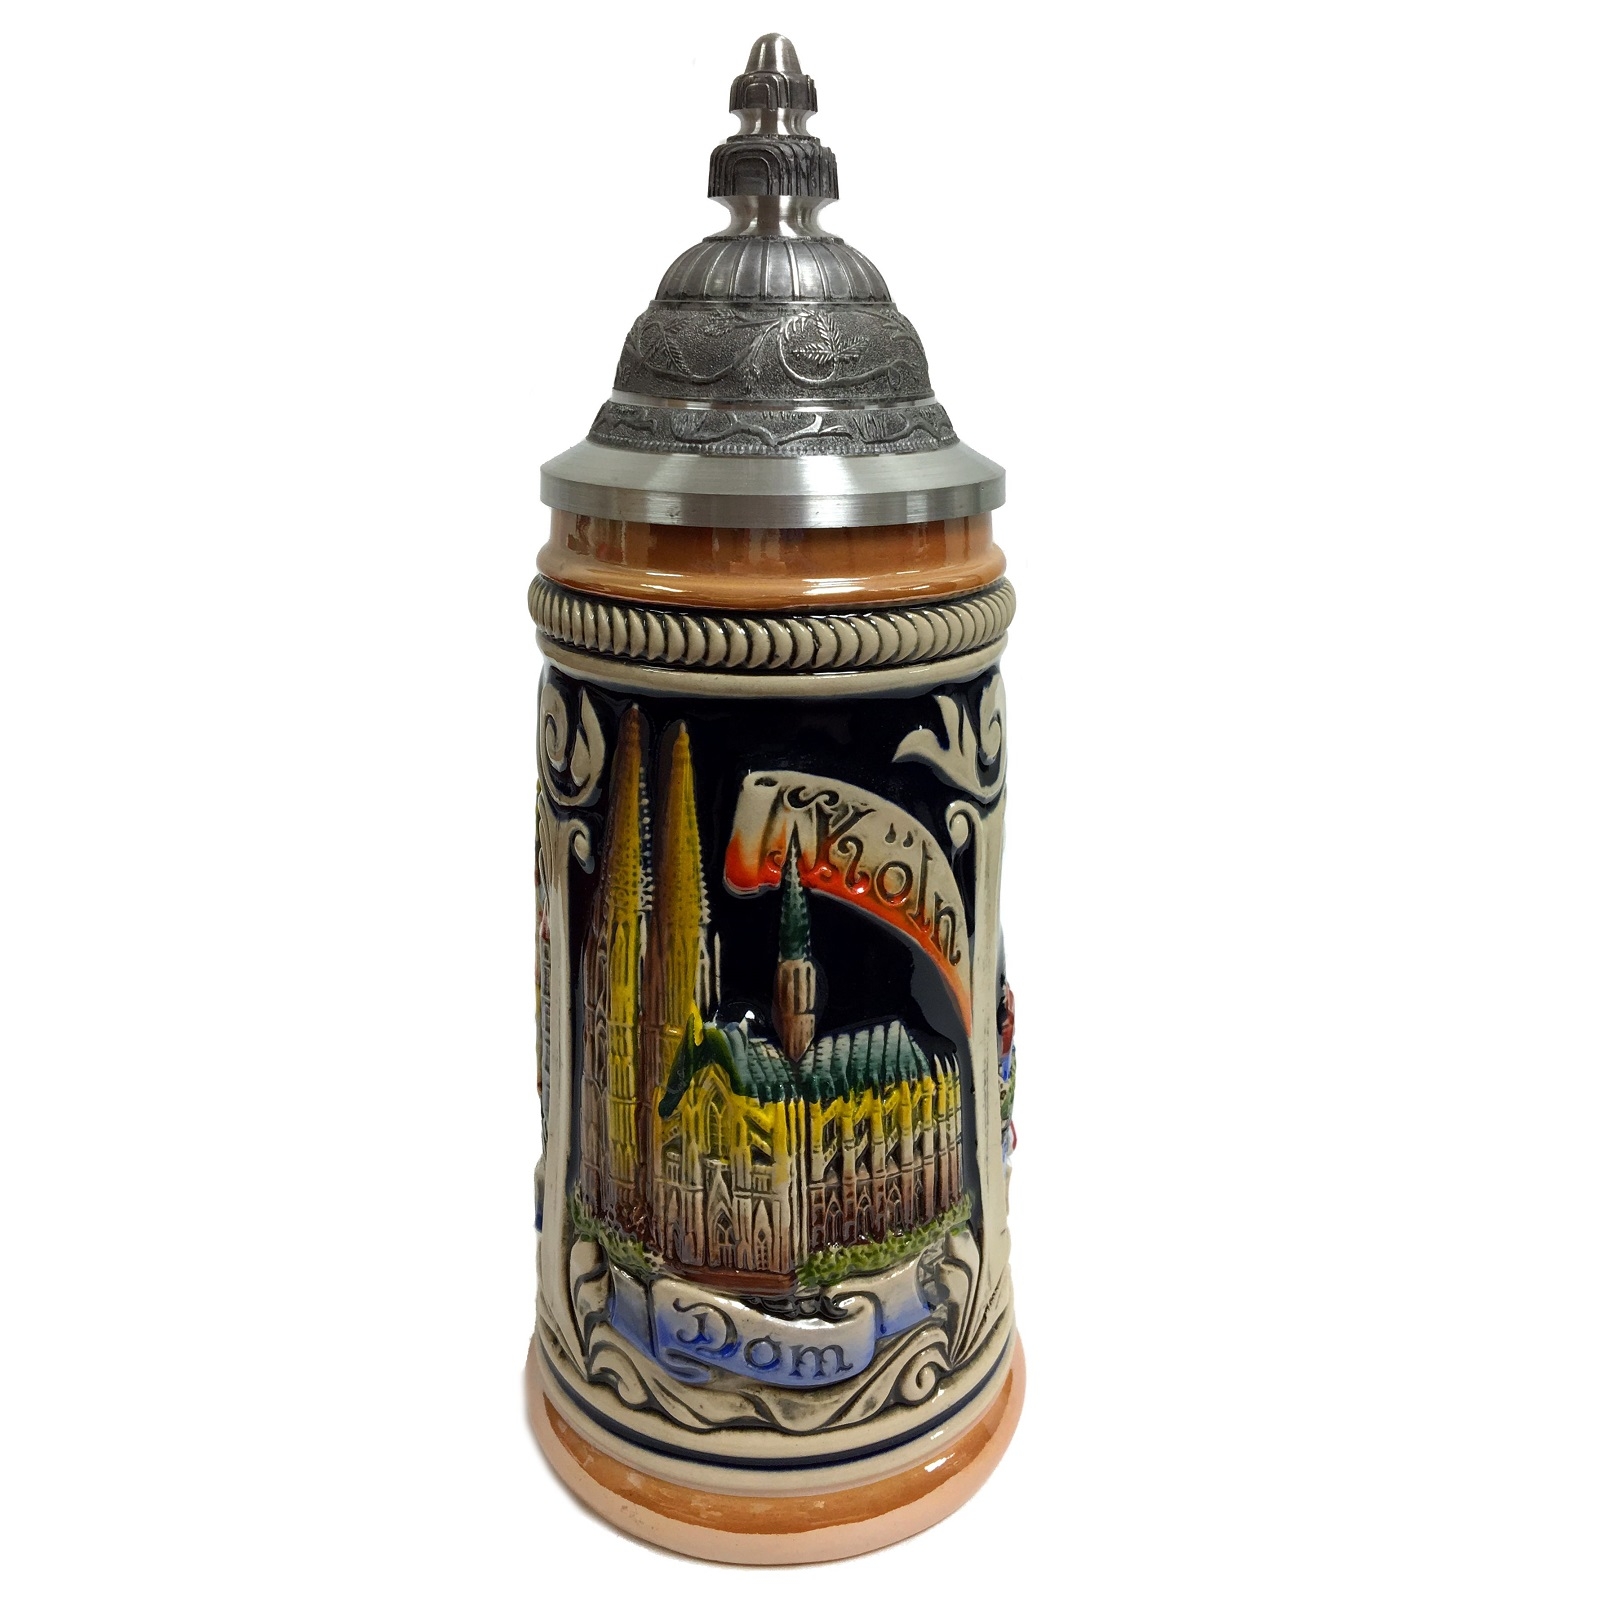 City of Koln Cologne Relief German Stoneware Beer Stein .5 L Made in Germany